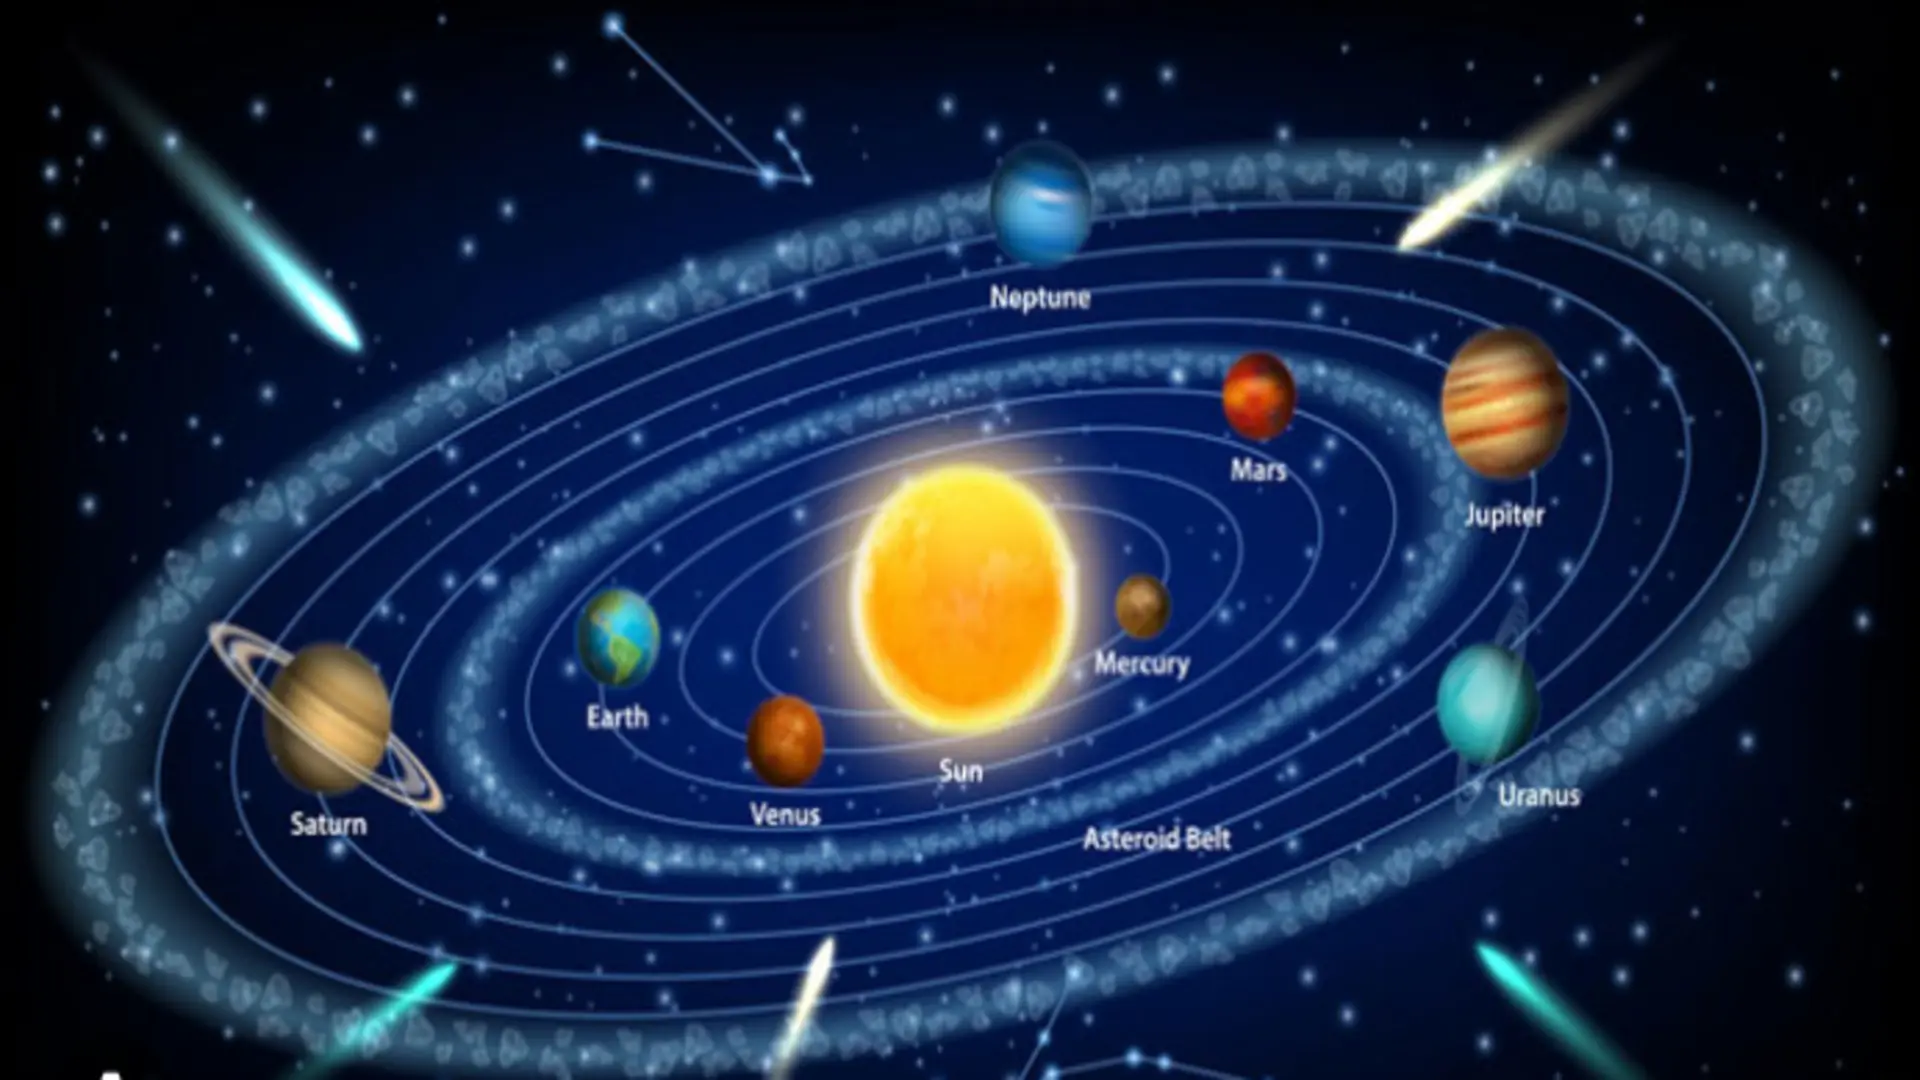 Learn About the Planets, Moons, and Other Objects in Our Solar System